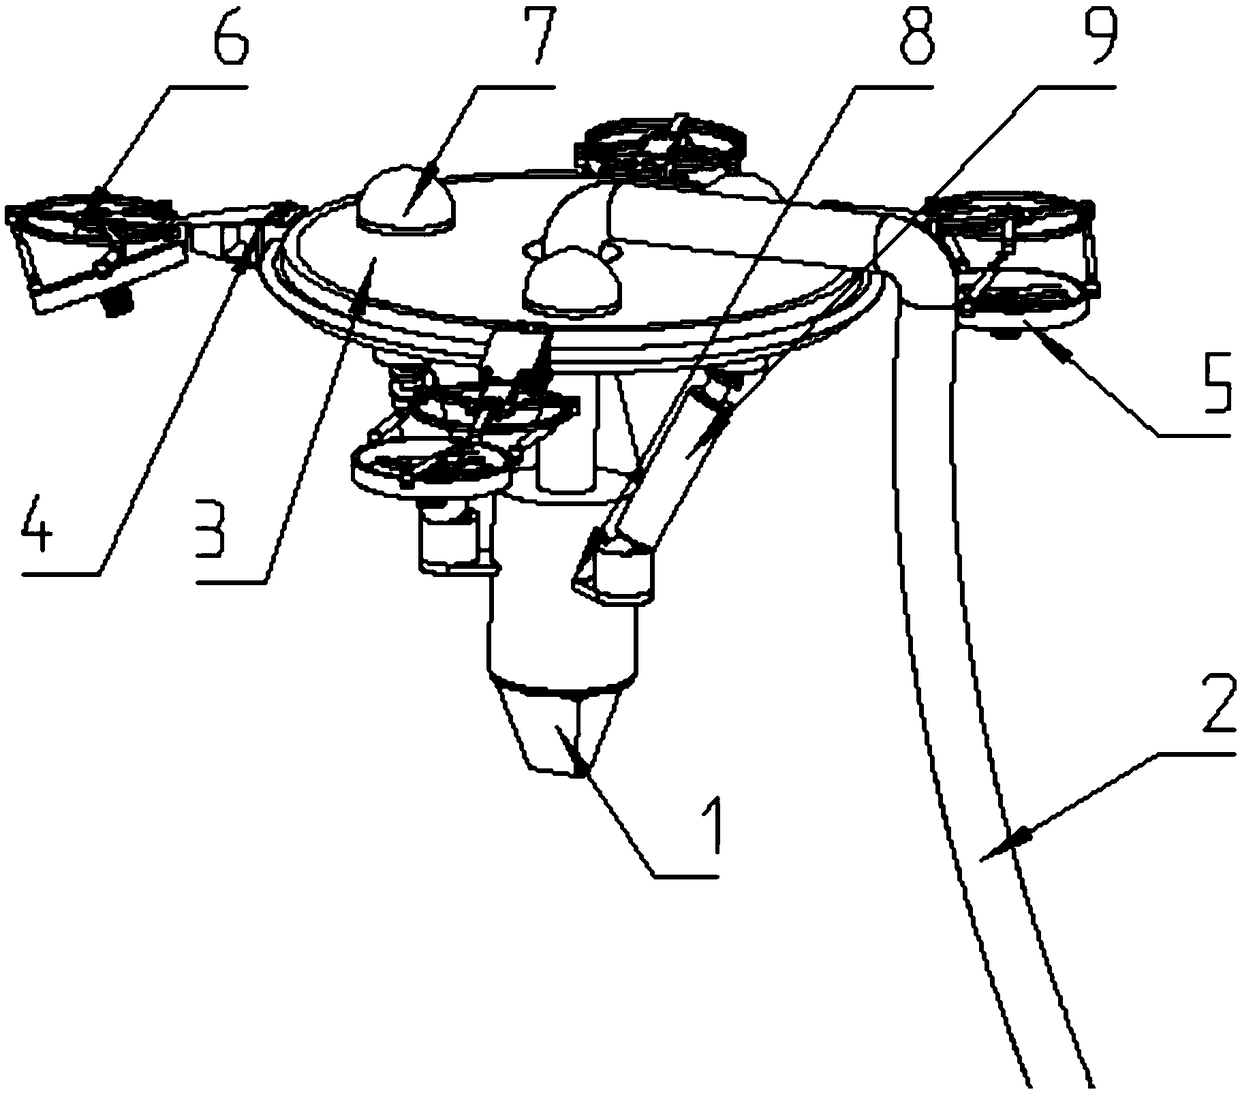 UAV (unmanned aerial vehicle) type three-dimensional architecture printer